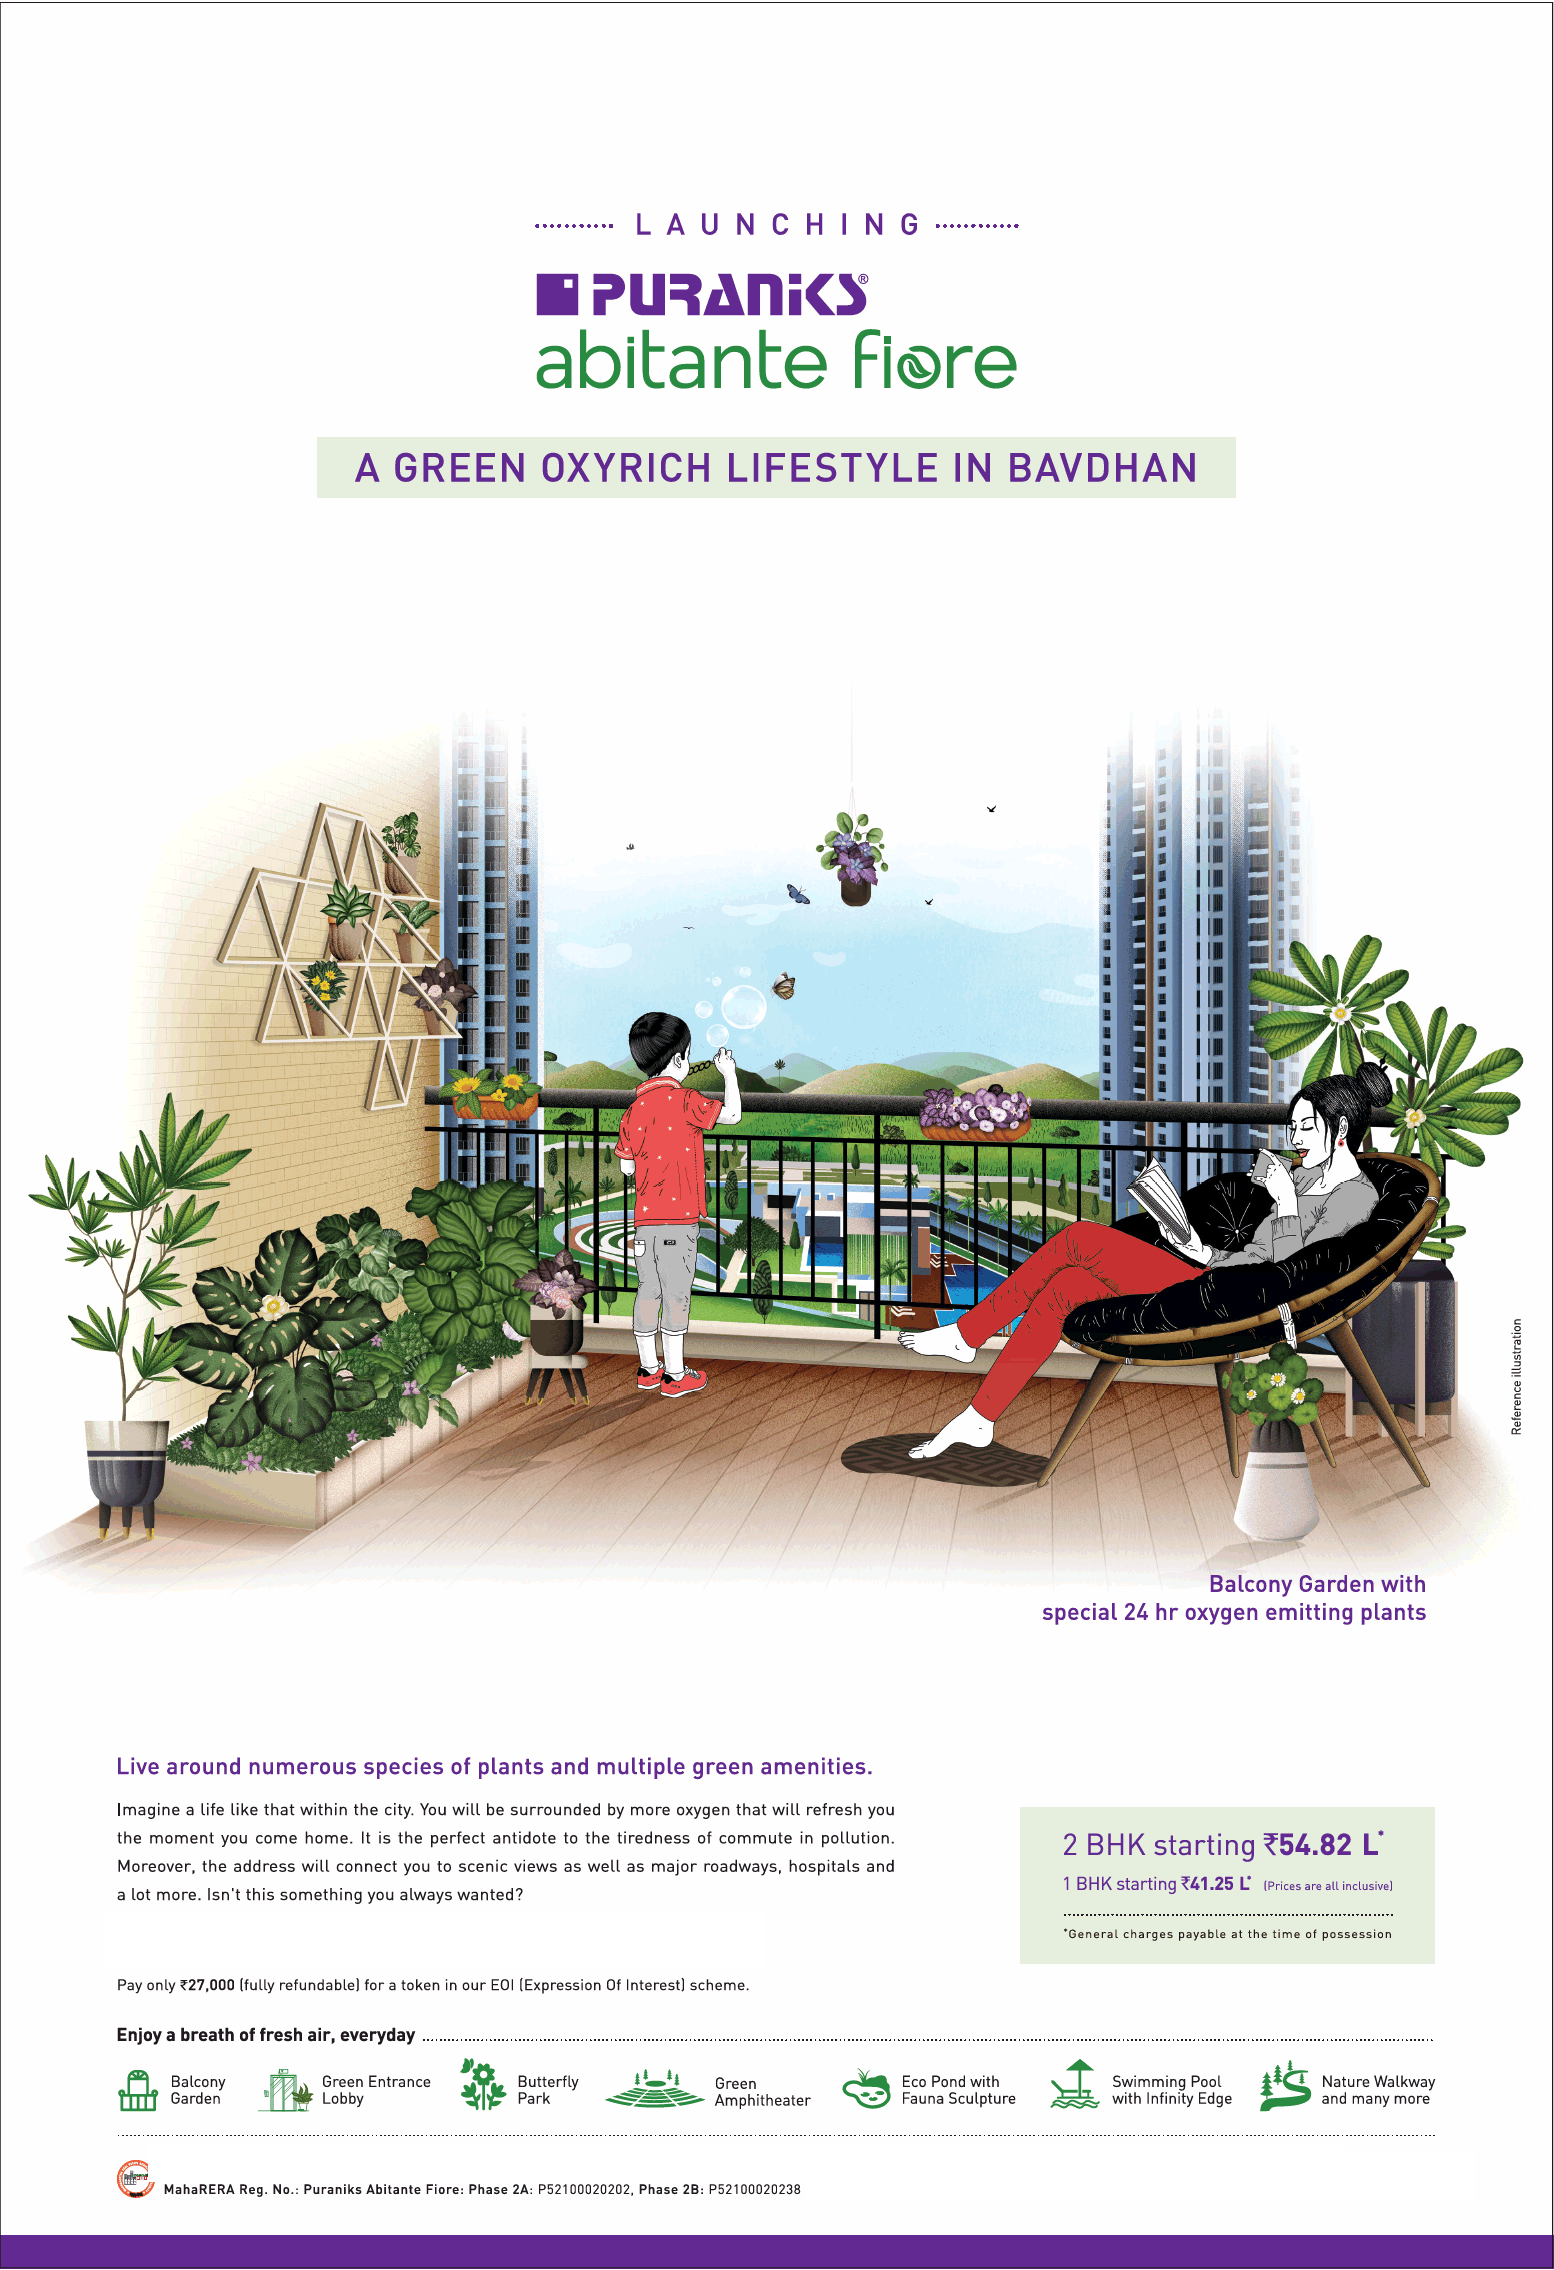 2 BHK starting Rs 54.82 lakh at Puraniks Abitante in Pune Update